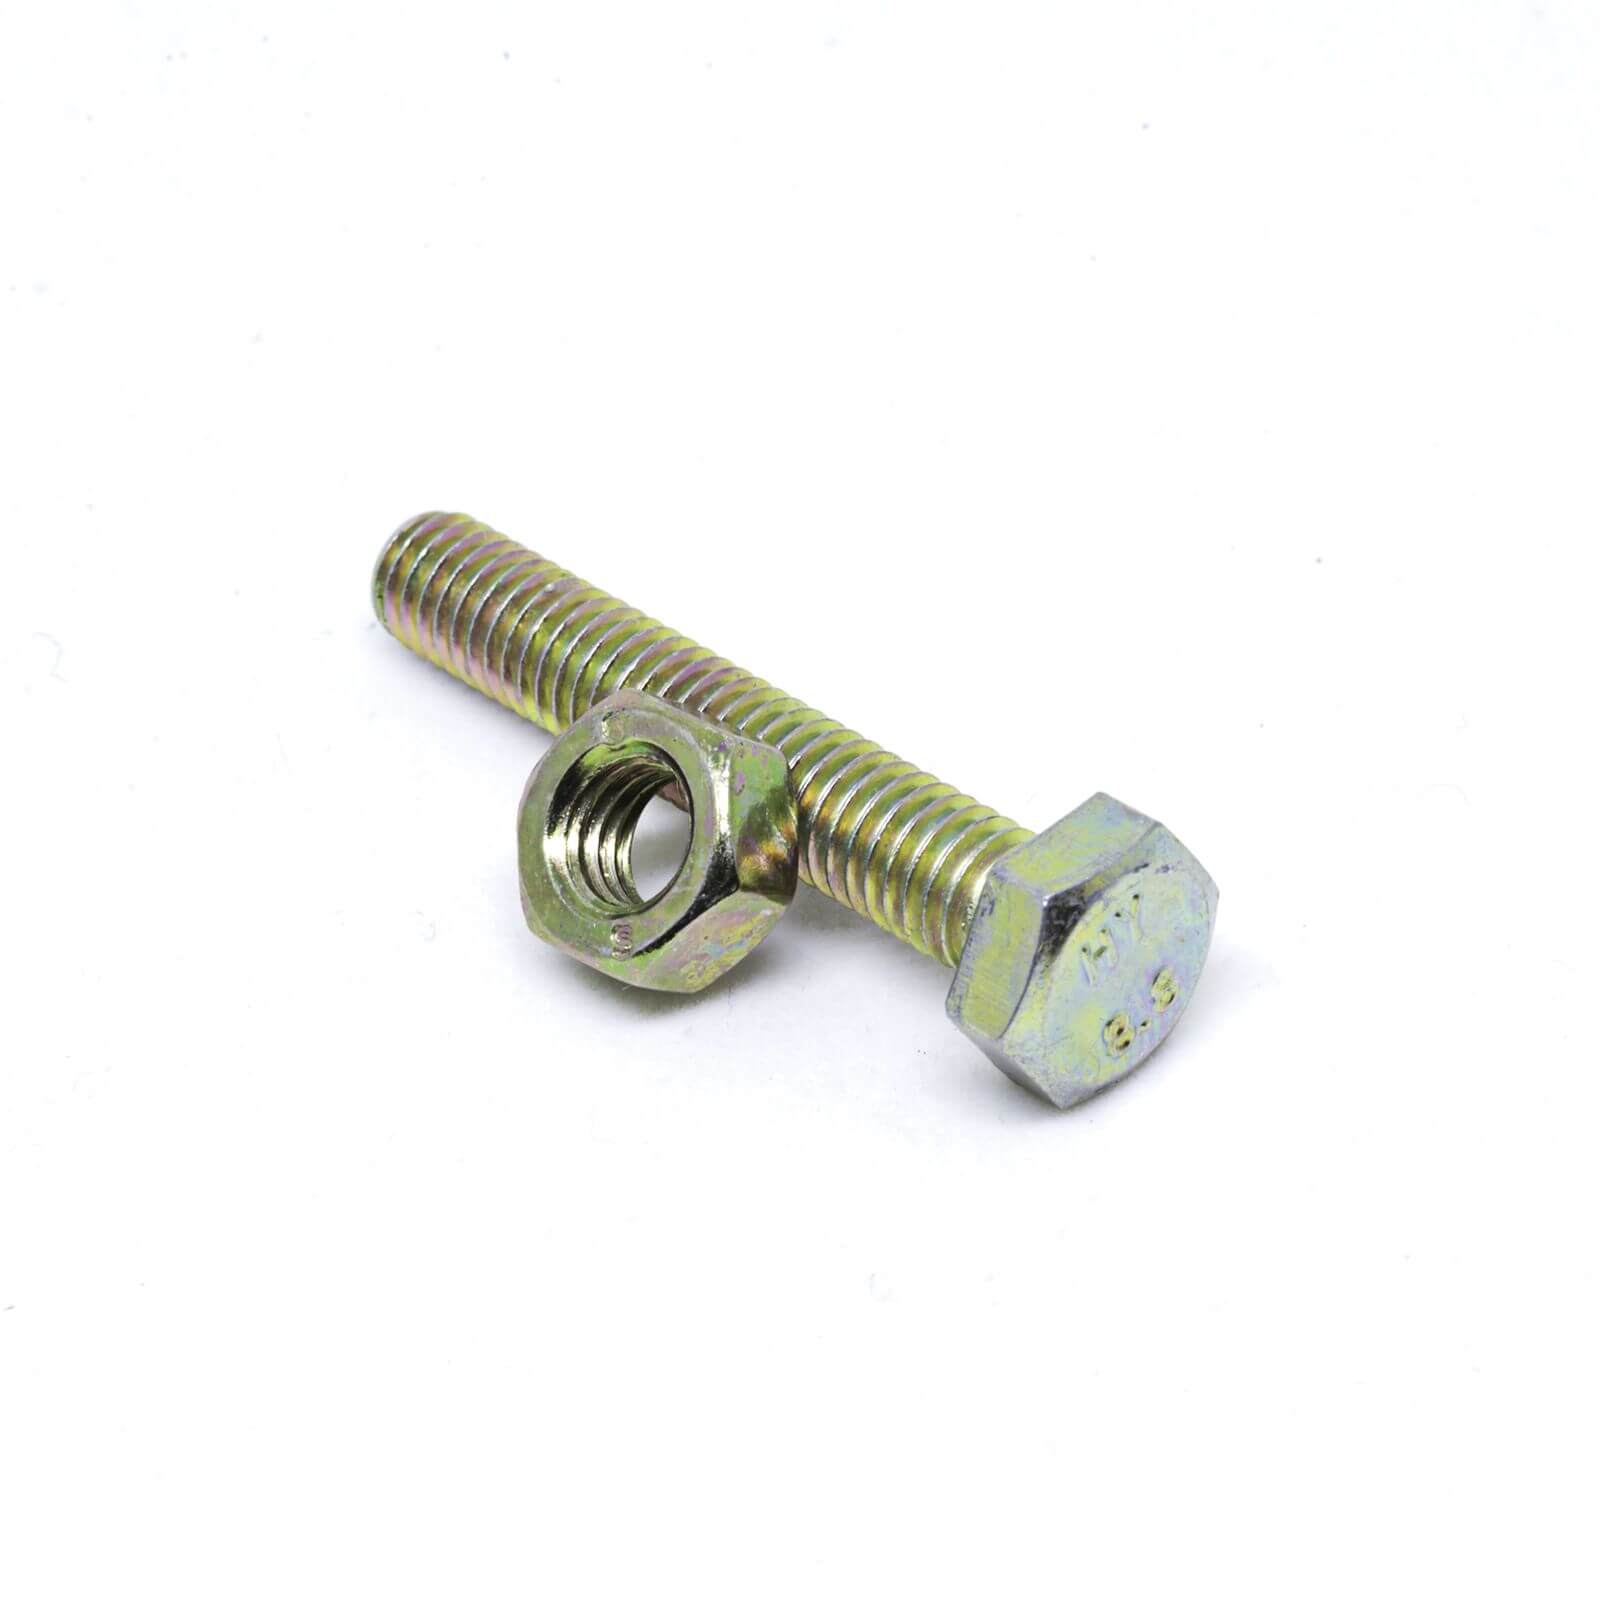 Pinnacle High Tensile Bolts and Nuts - 5 x 50mm - 5 Pack